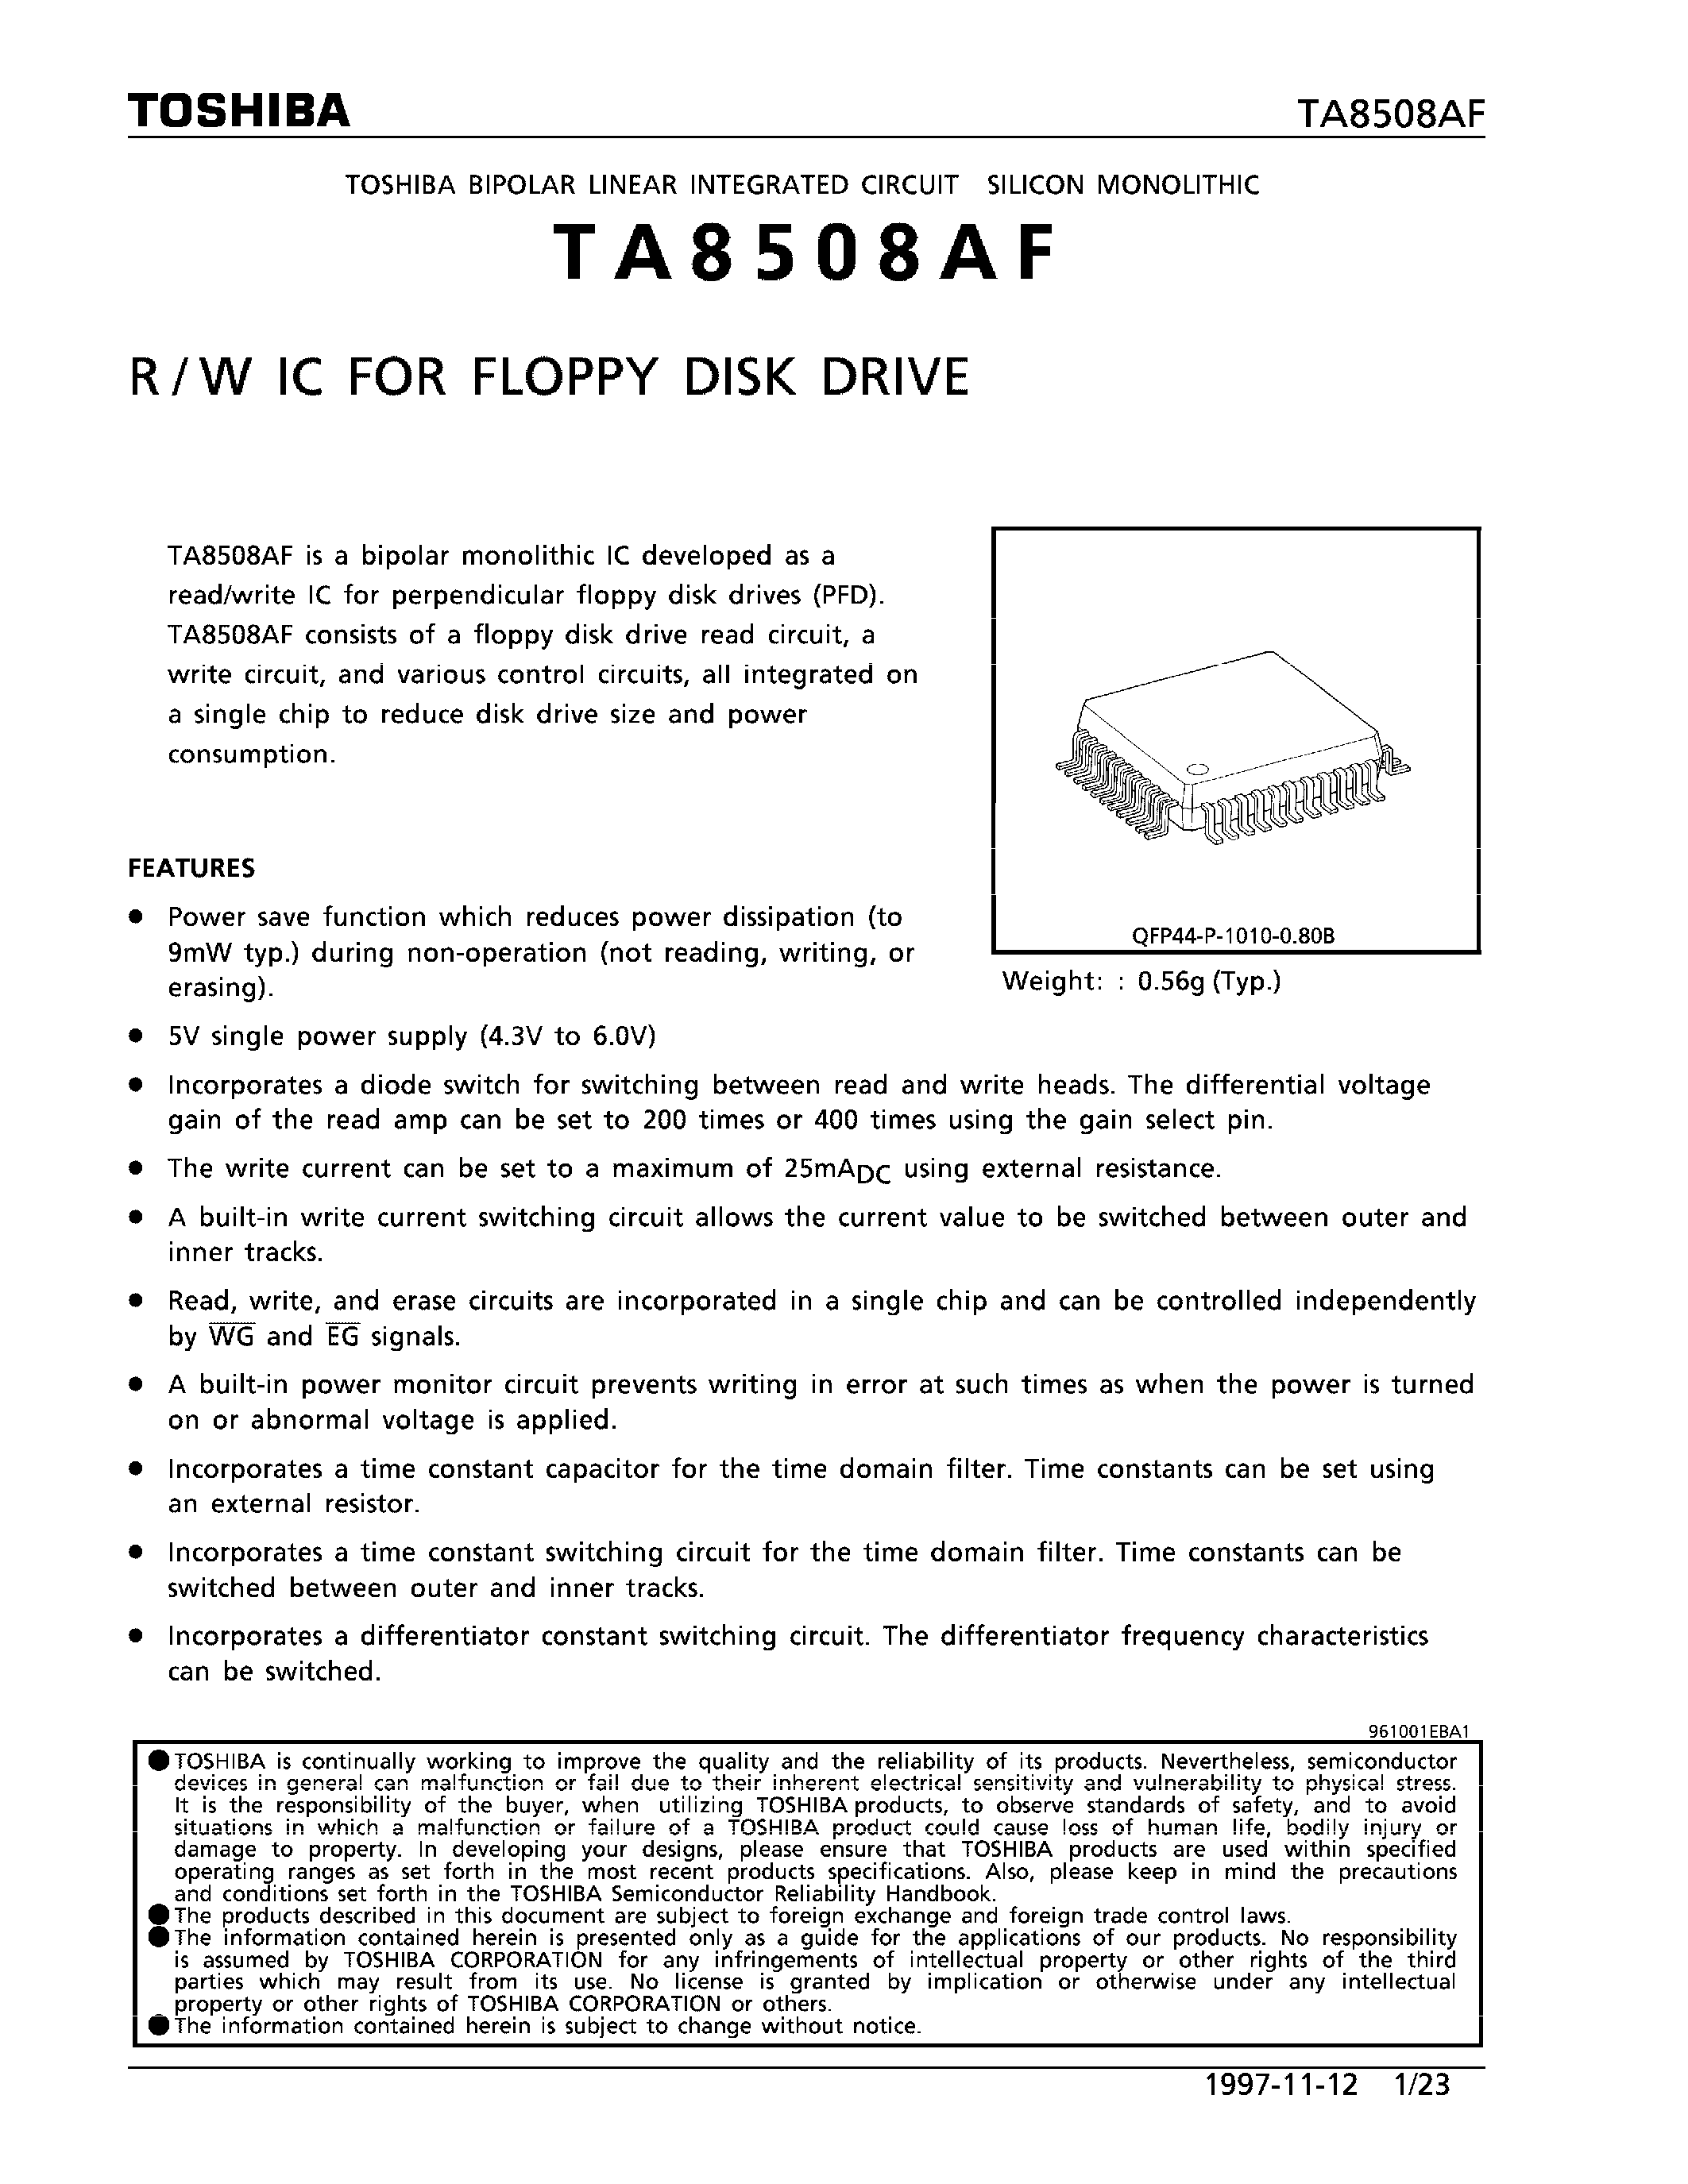 Datasheet TA8508AF - R/W IC FOR FLOPPY DISK DRIVE page 1